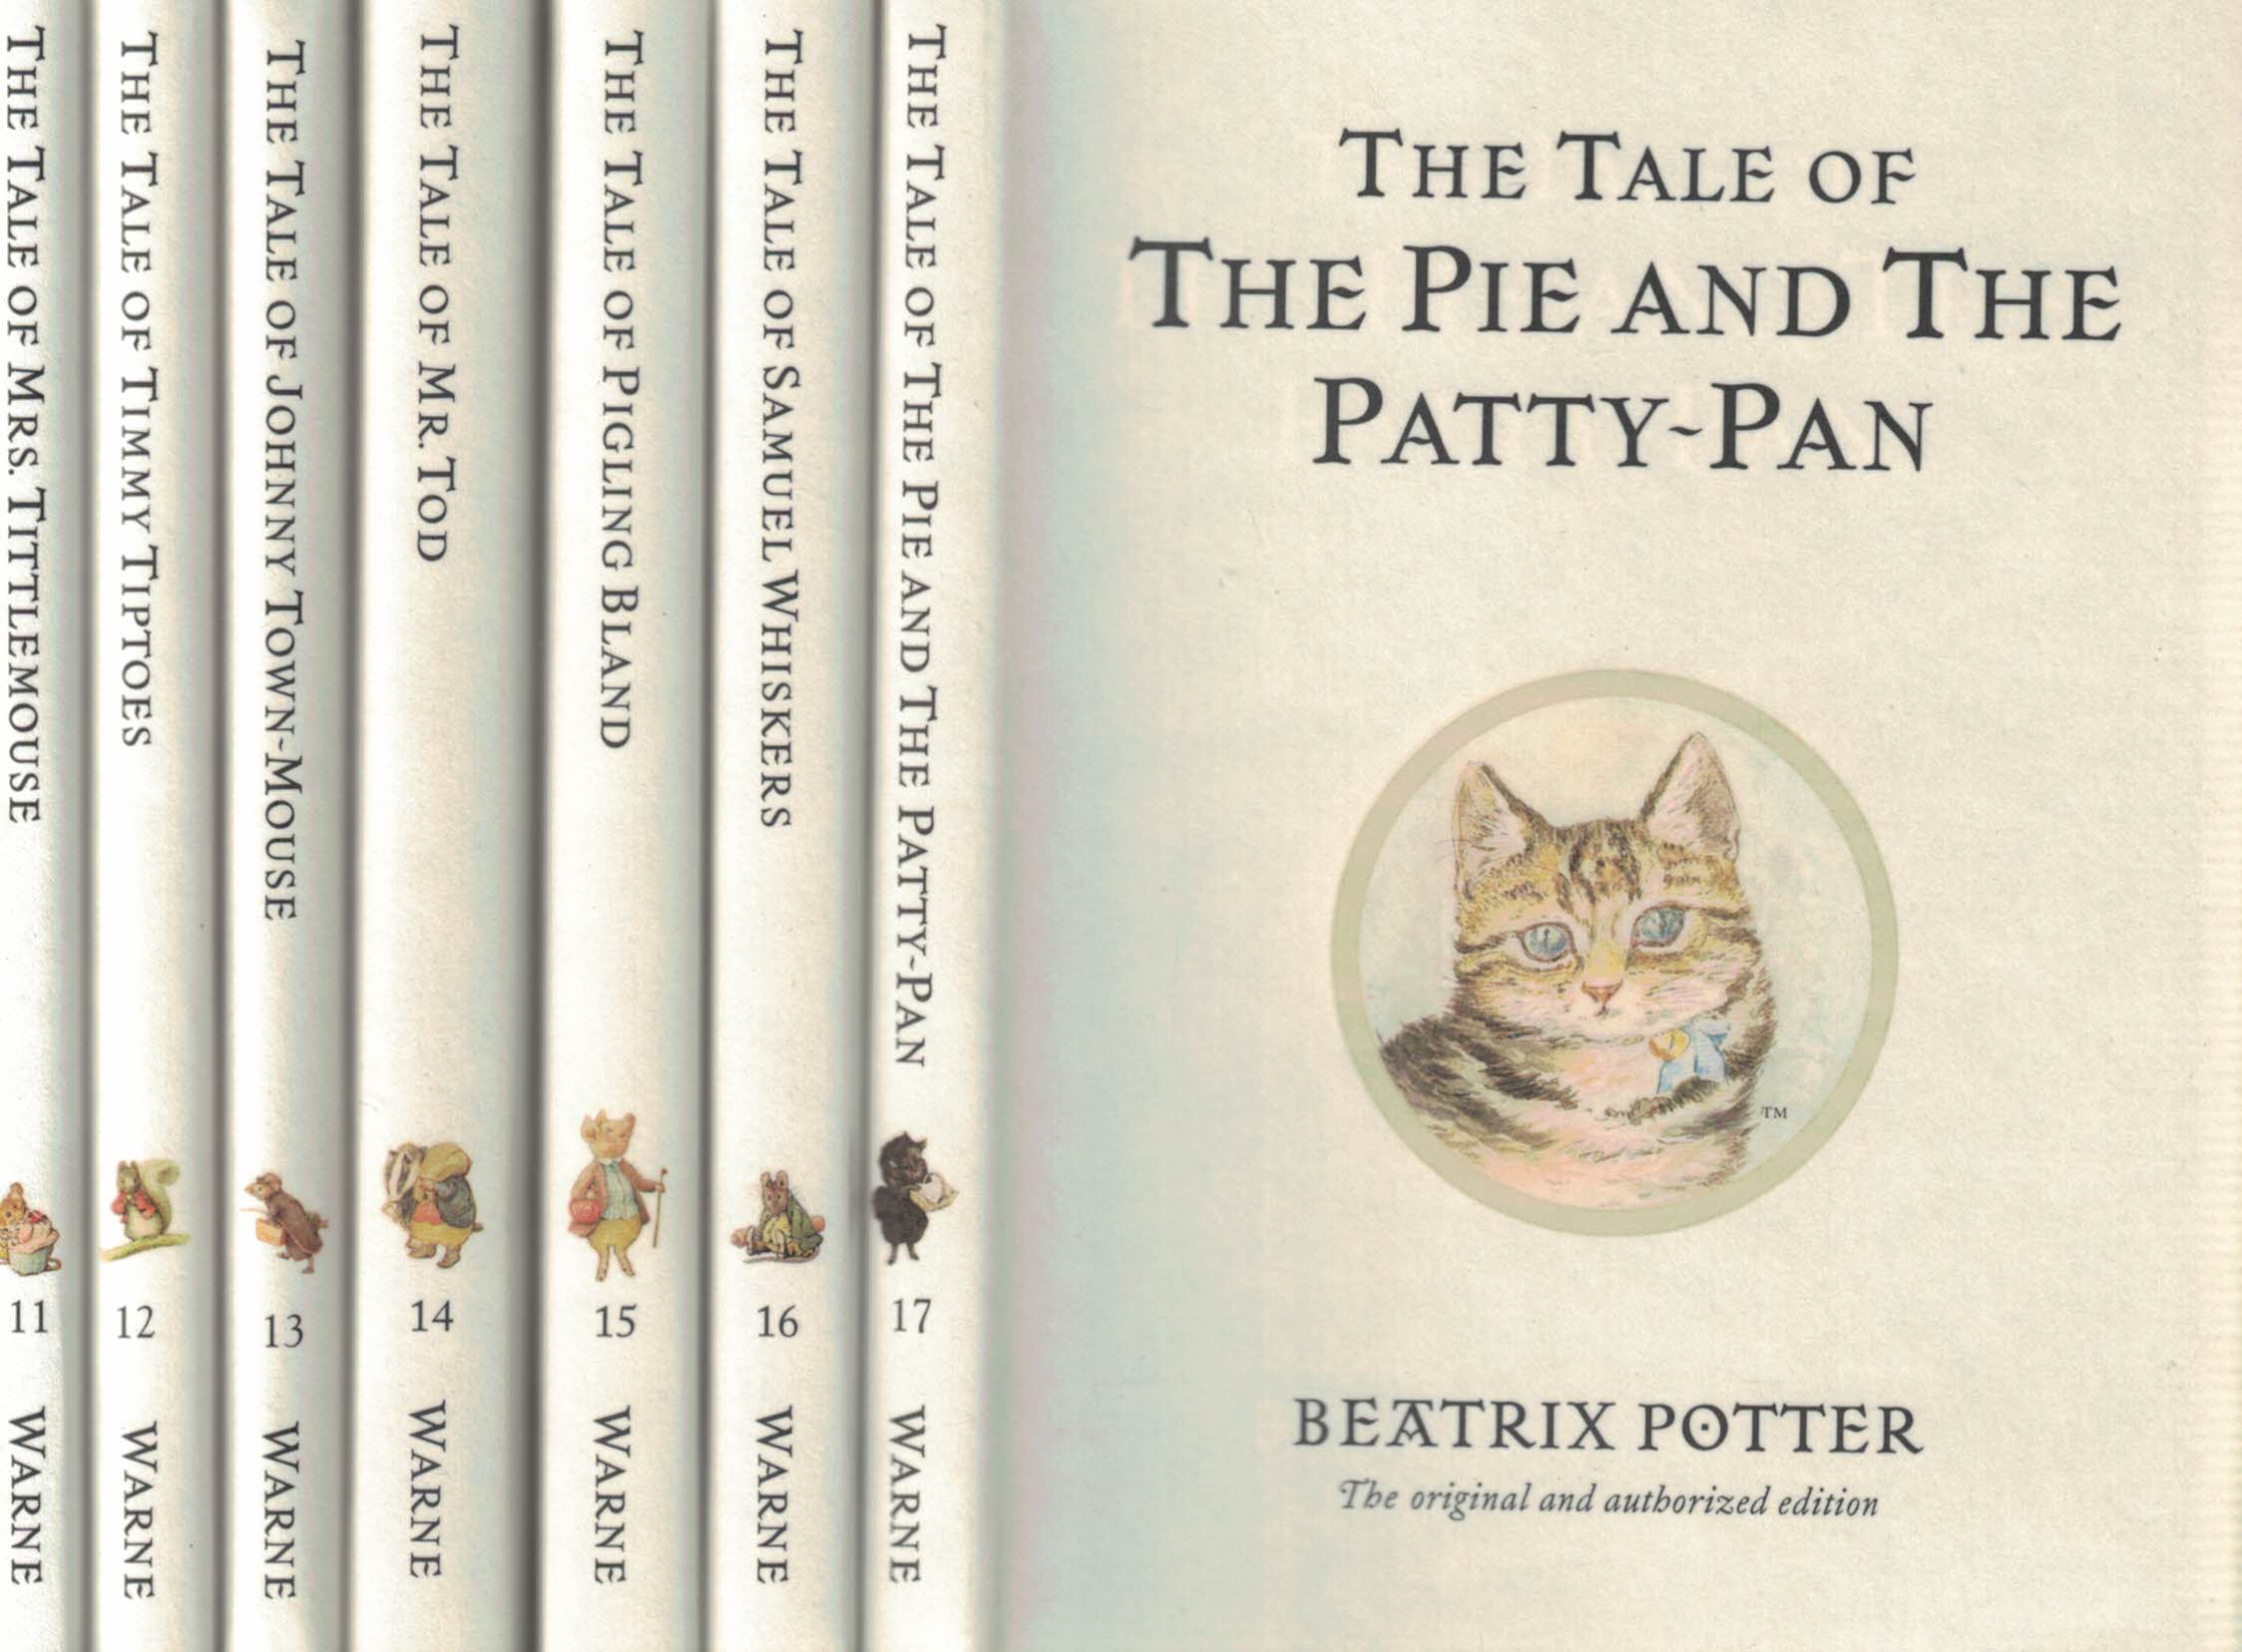 The World of Peter Rabbit. The Complete Collection of Original Tales 1 - 23. Boxed set.